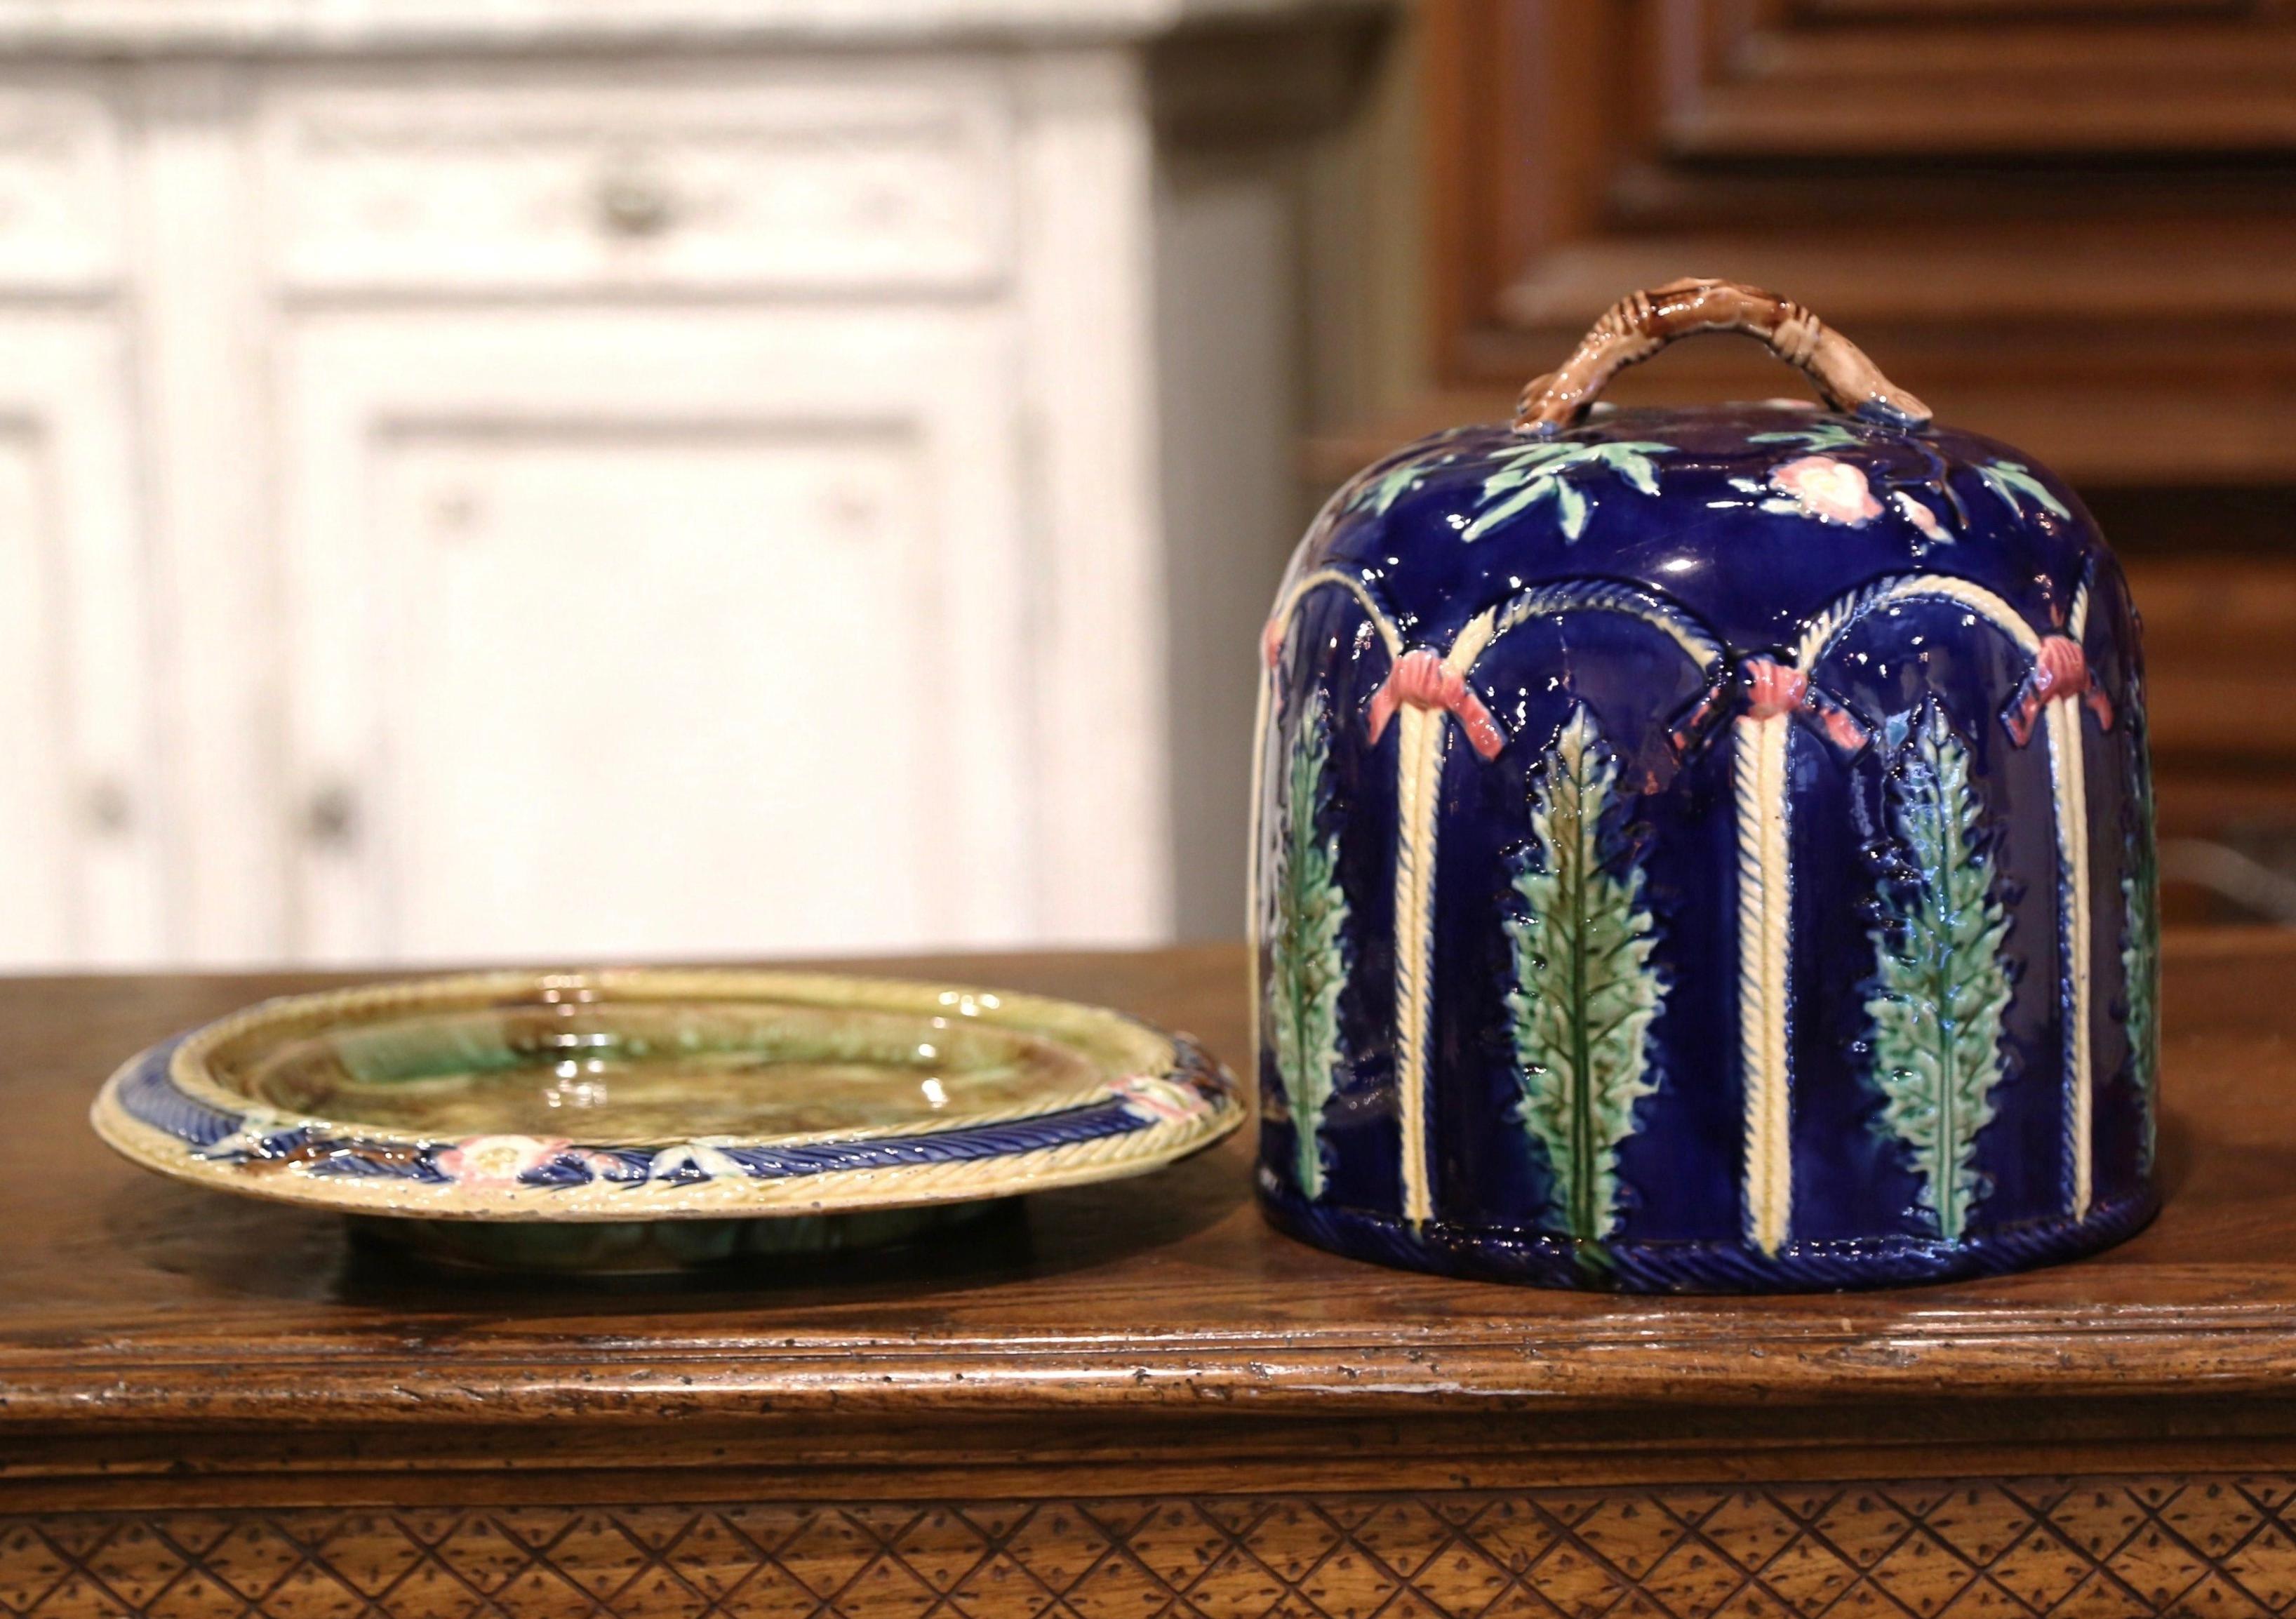 This colorful two-piece antique Majolica cheese dome was crafted in England, circa 1870. Attributed to Thomas Forester, the dish includes a cobalt blue and green circular platter bottom with molded border, and decorated with floral and leaf motifs.